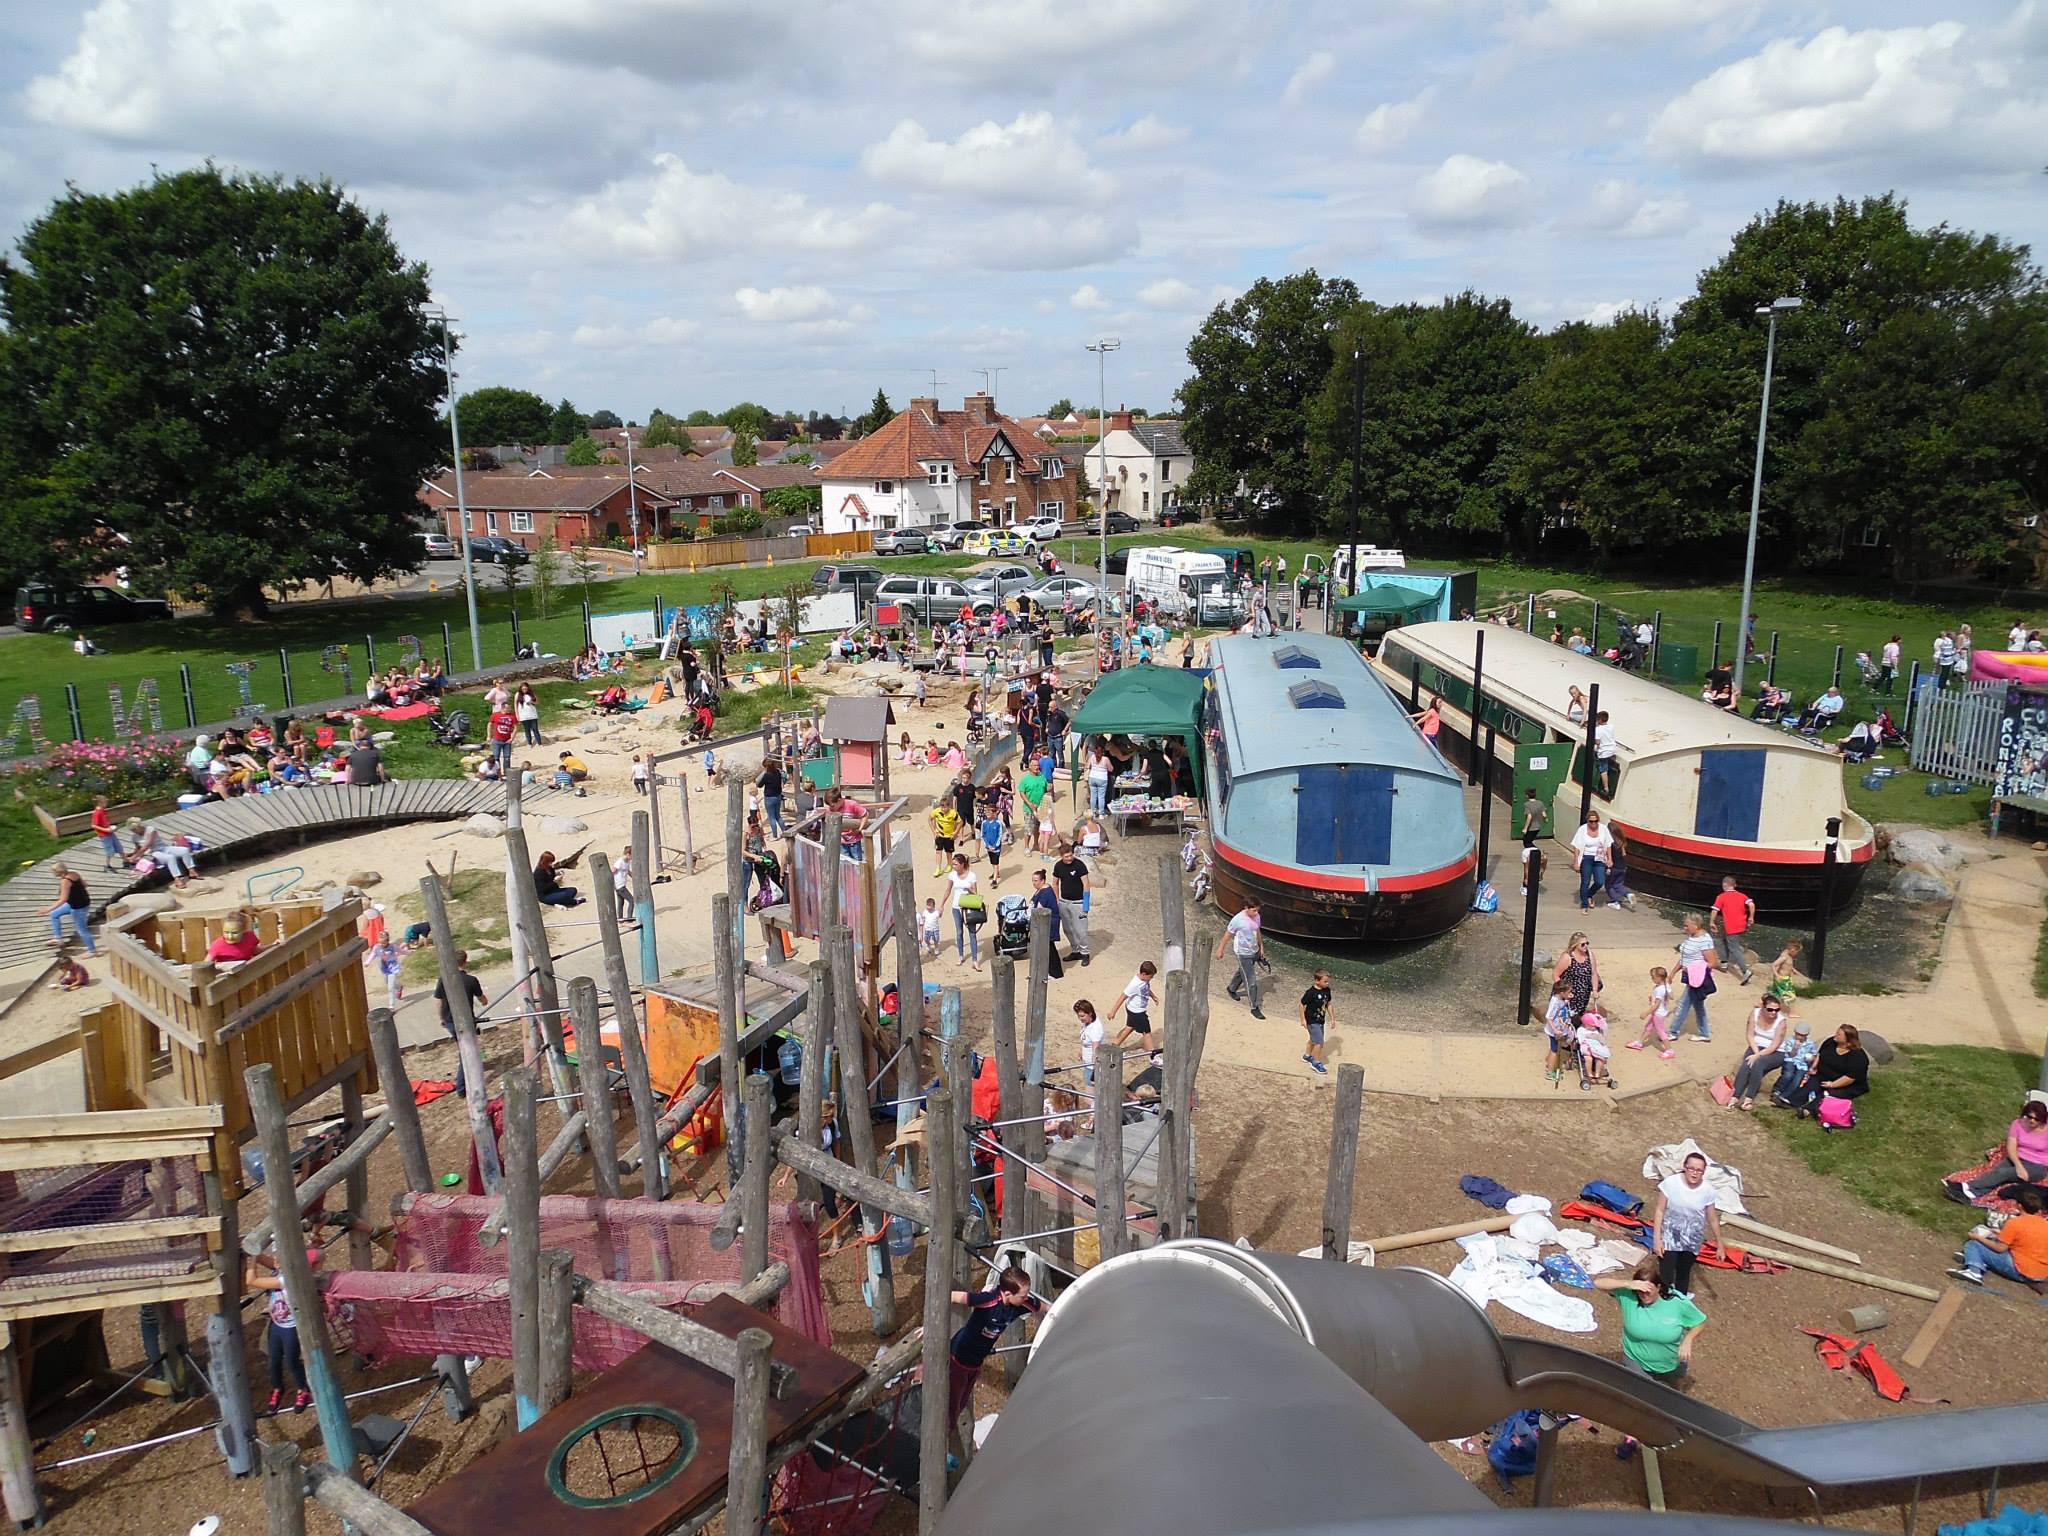 Cambridgeshire County Council says the replacement play park will support part of Wisbech “in a high area of need, with a significant footfall in an environment already well used by children, young people and families within the area”.